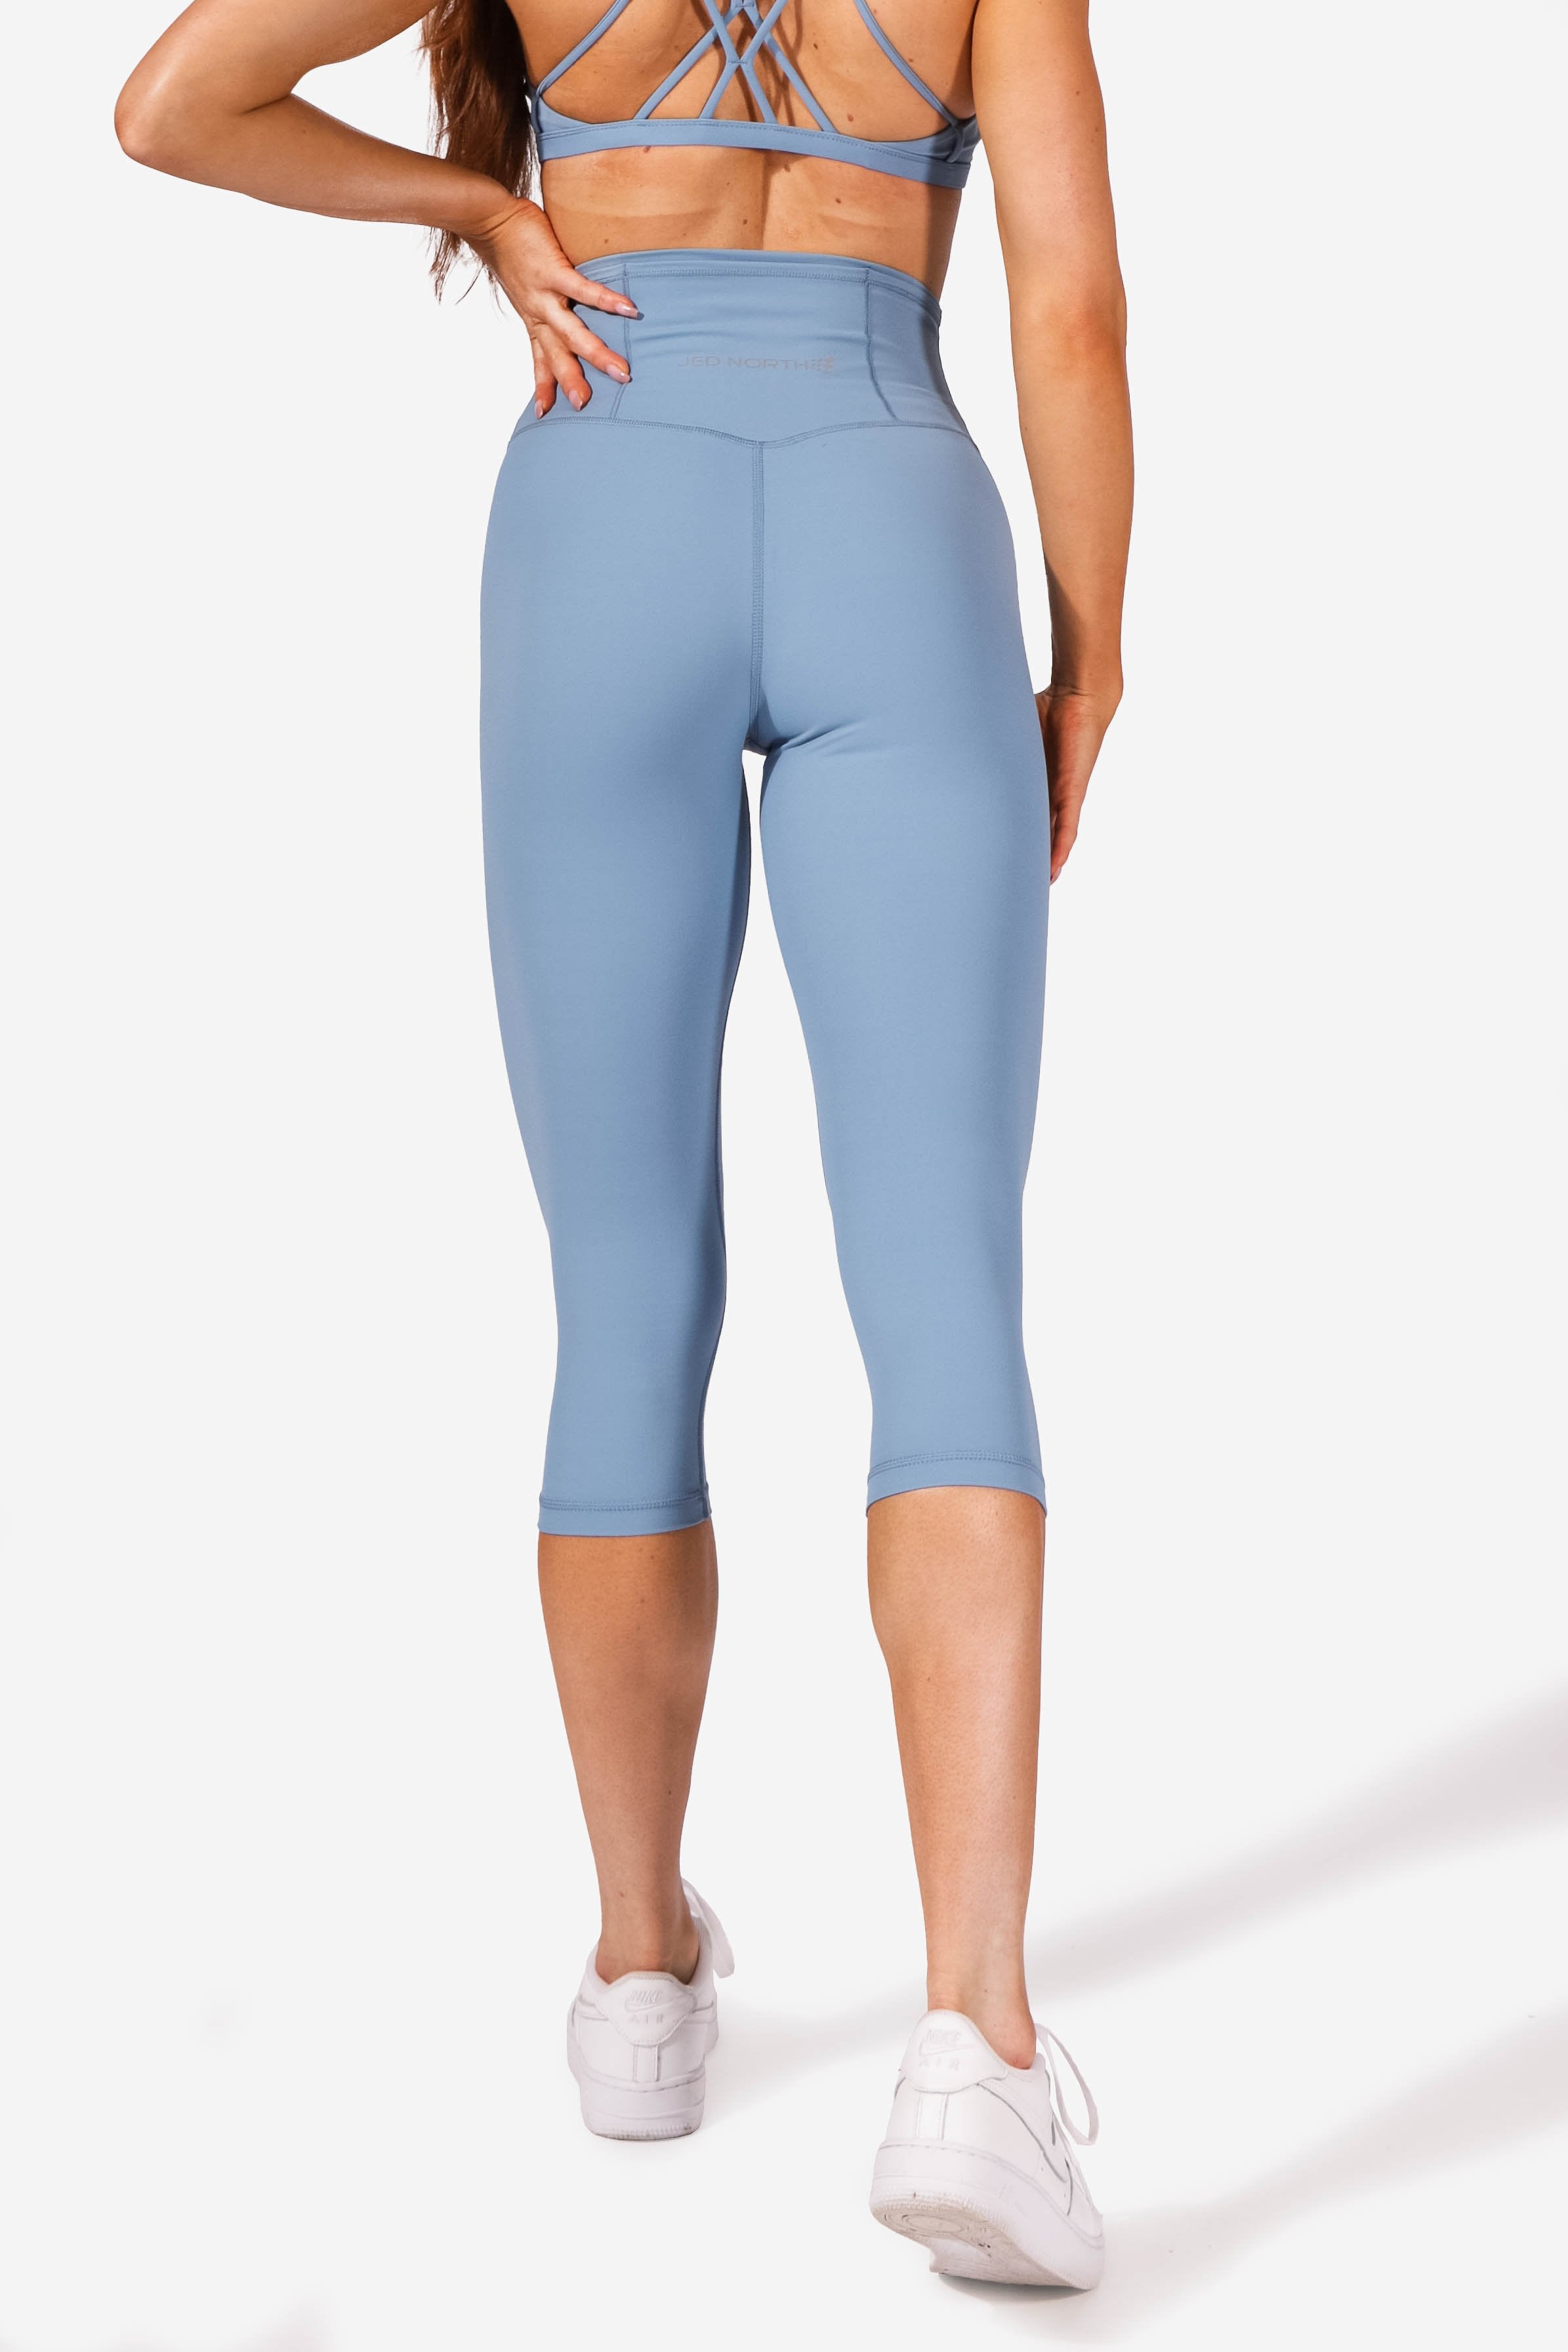 Let's talk about Flux…Yeehaw 🤠 Flux Leggings are a hybrid fit